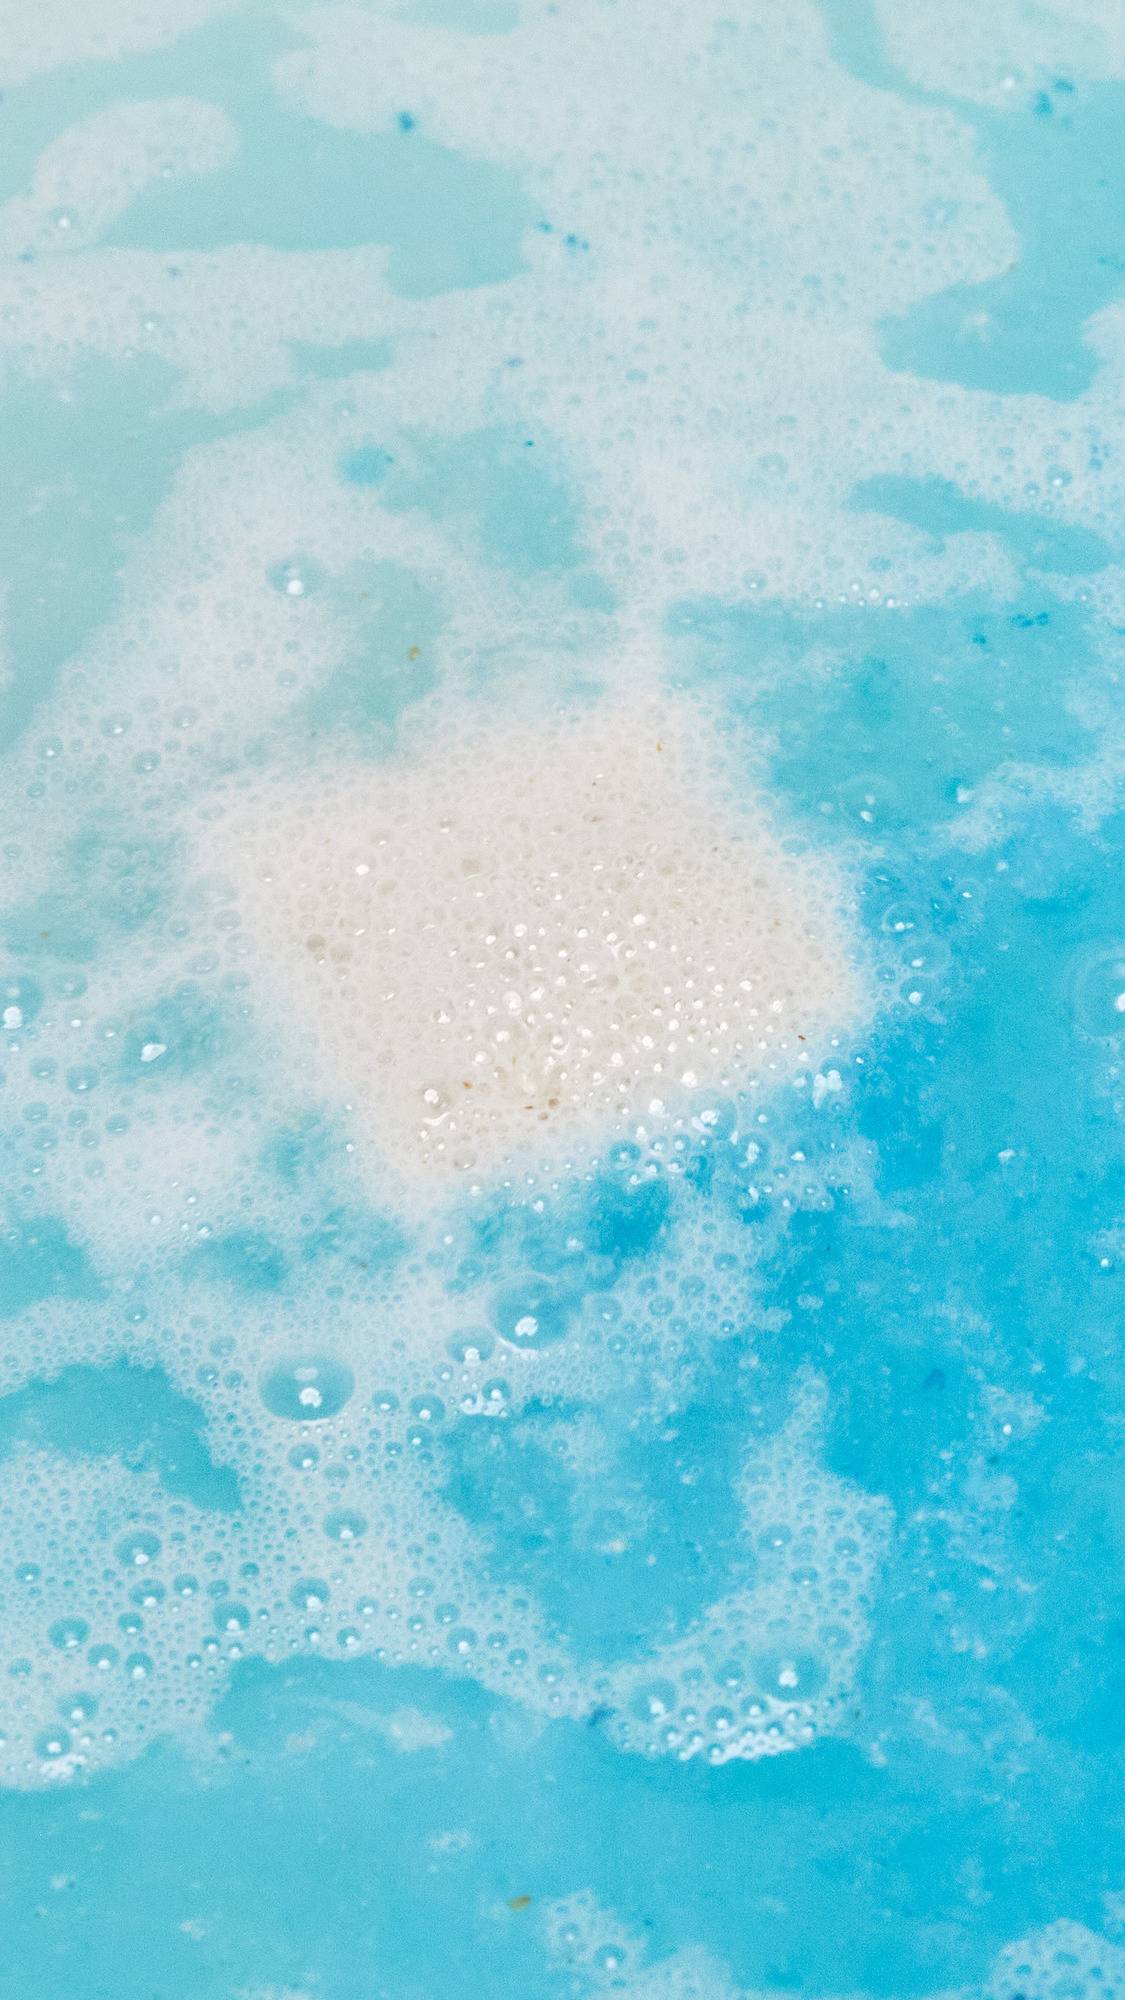 The Dream Cream Epsom salt bath bomb has dissolved leaving clear, turquoise water with a delicate dusting of foam on the surface. 